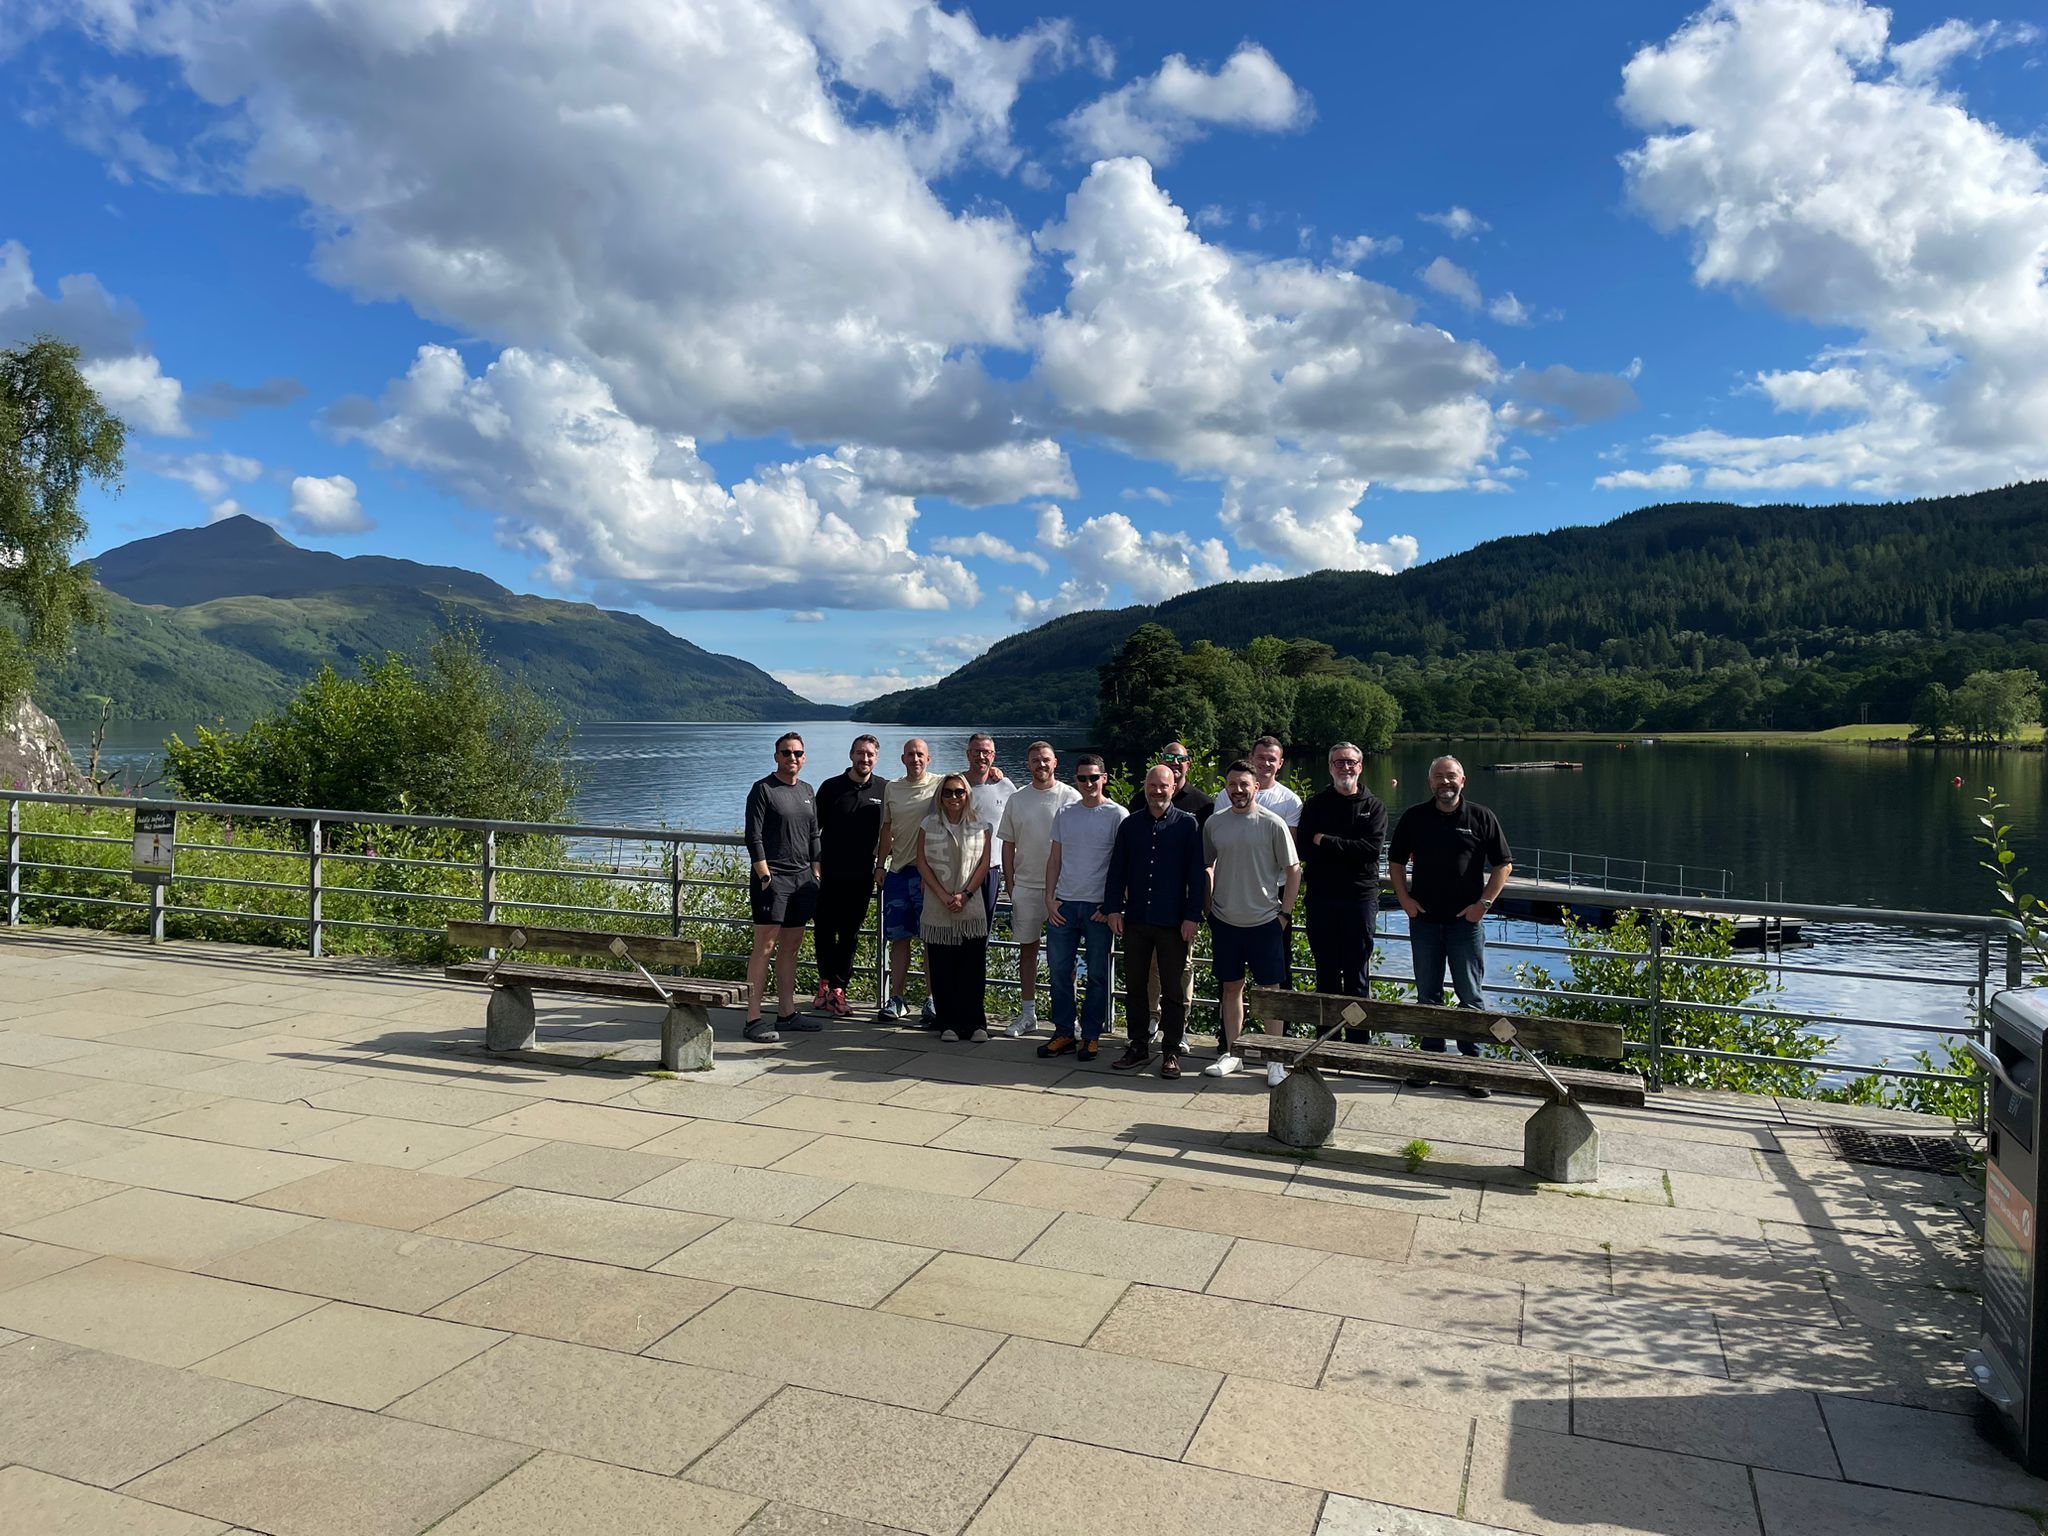 The team from Polypipe Building Products stand in front of Loch Lomond in Scotland. There is a blue sky with fluffy clouds and various green hills in the background.